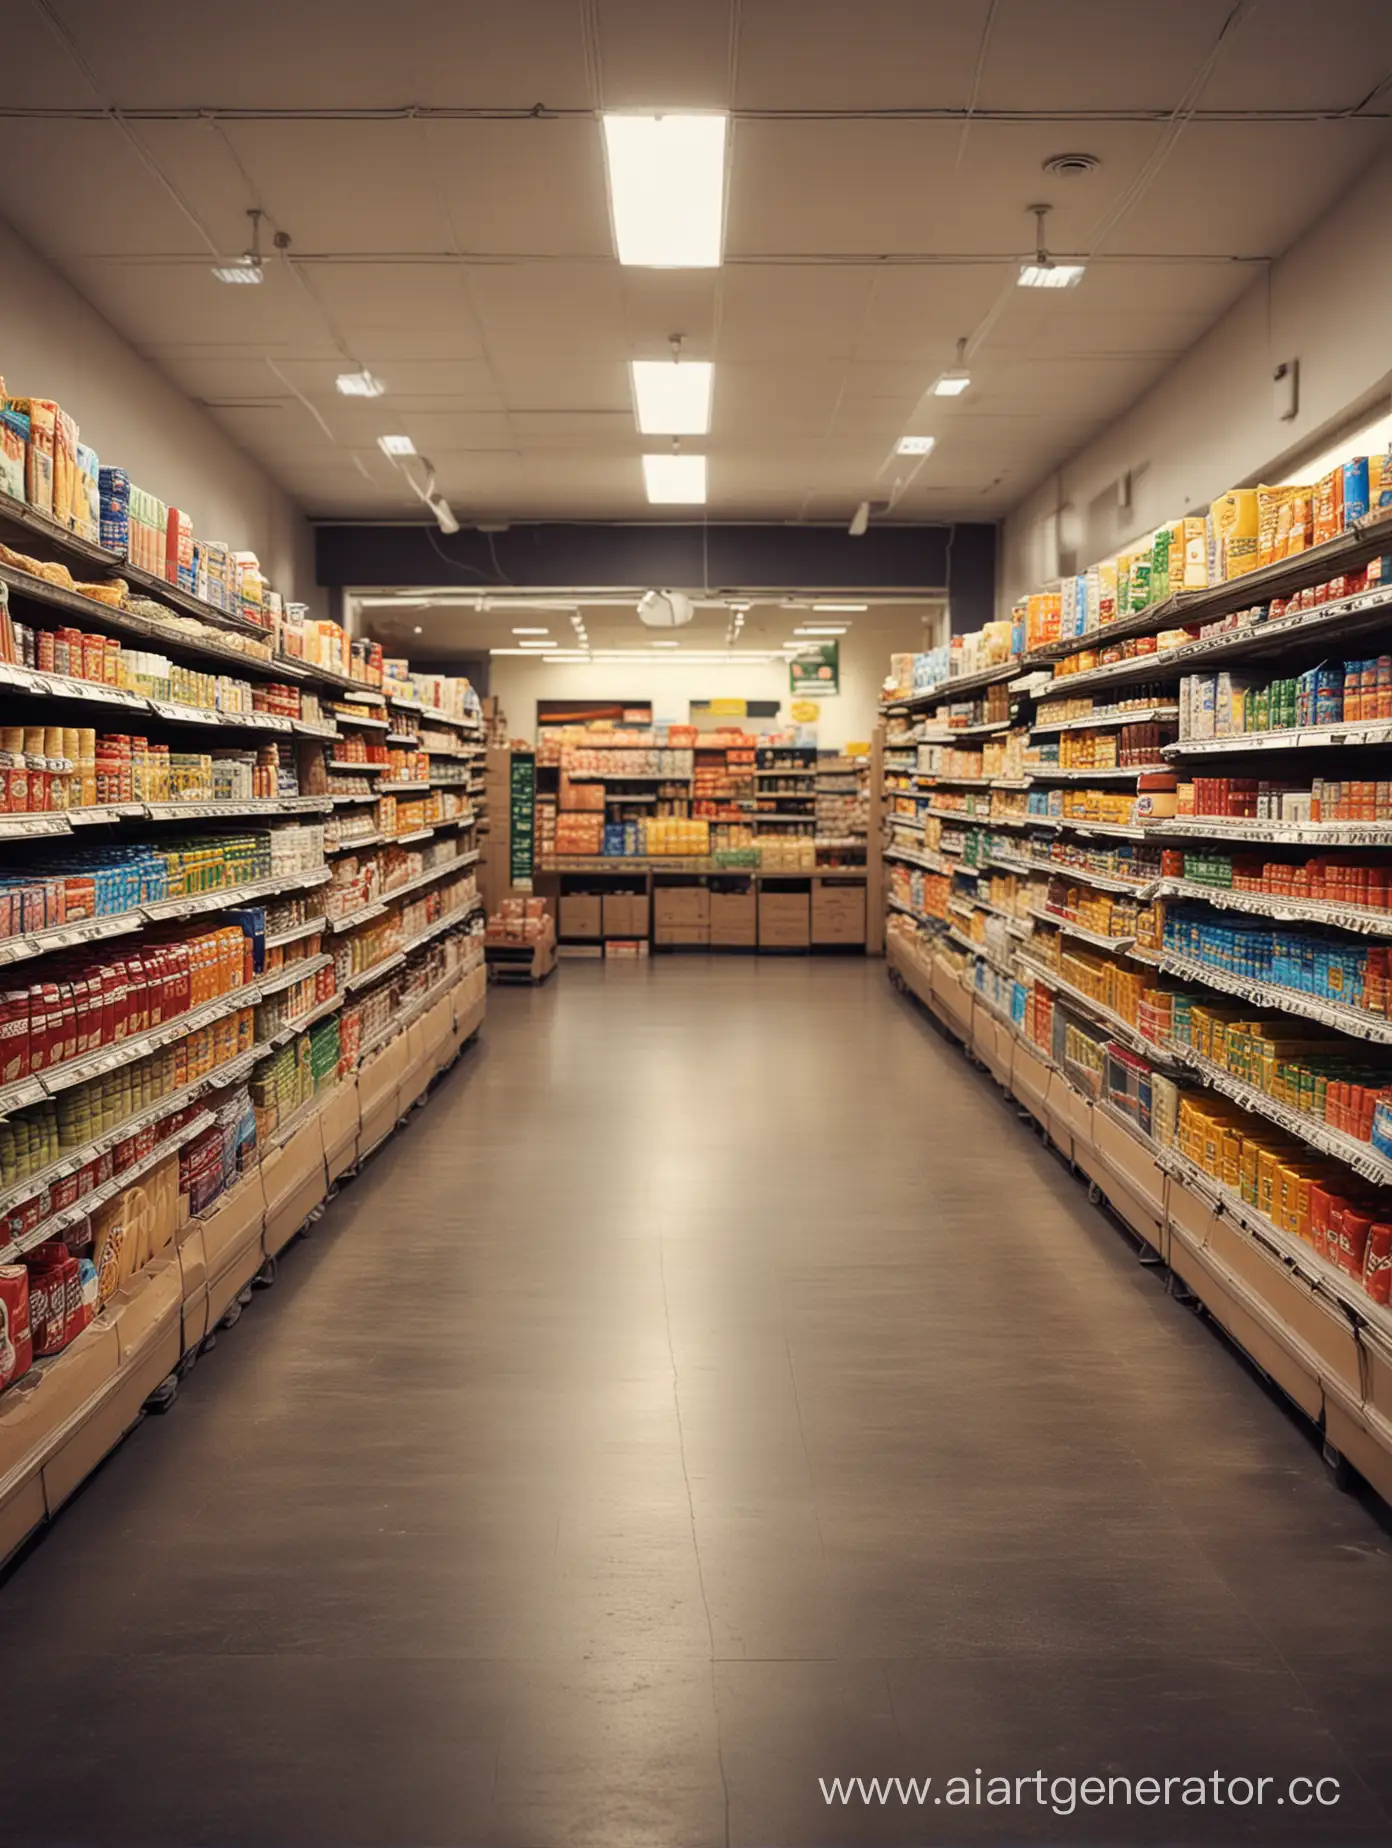 Busy-Grocery-Store-Interior-Scene-with-Shelves-and-Shoppers